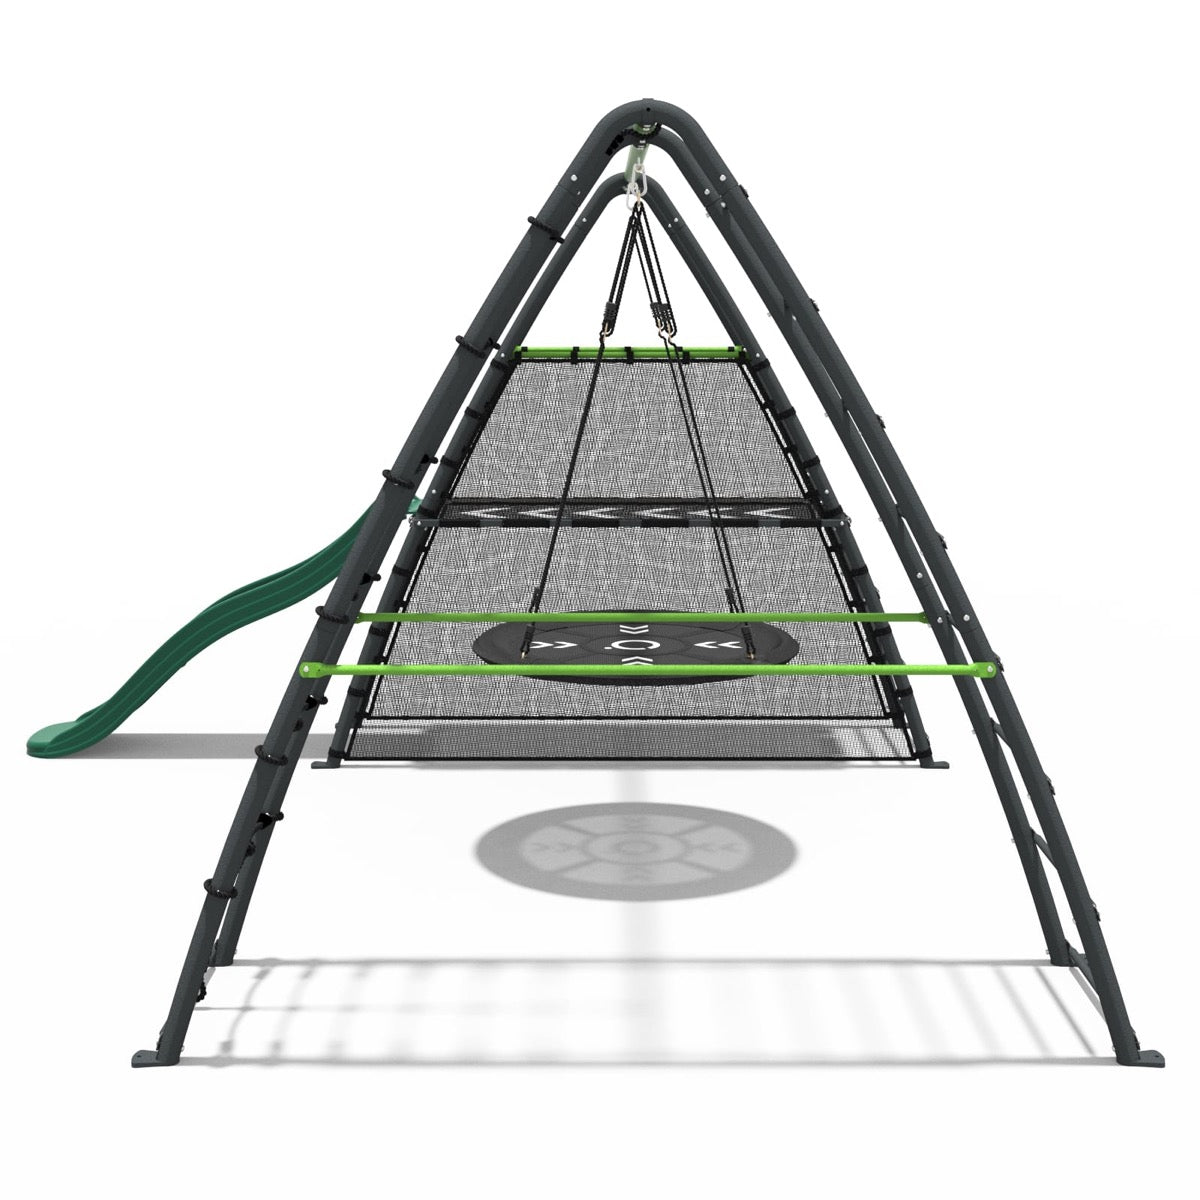 Rebo Steel Series Metal Swing Set + Up and Over wall & 6ft Slide - Nest Green